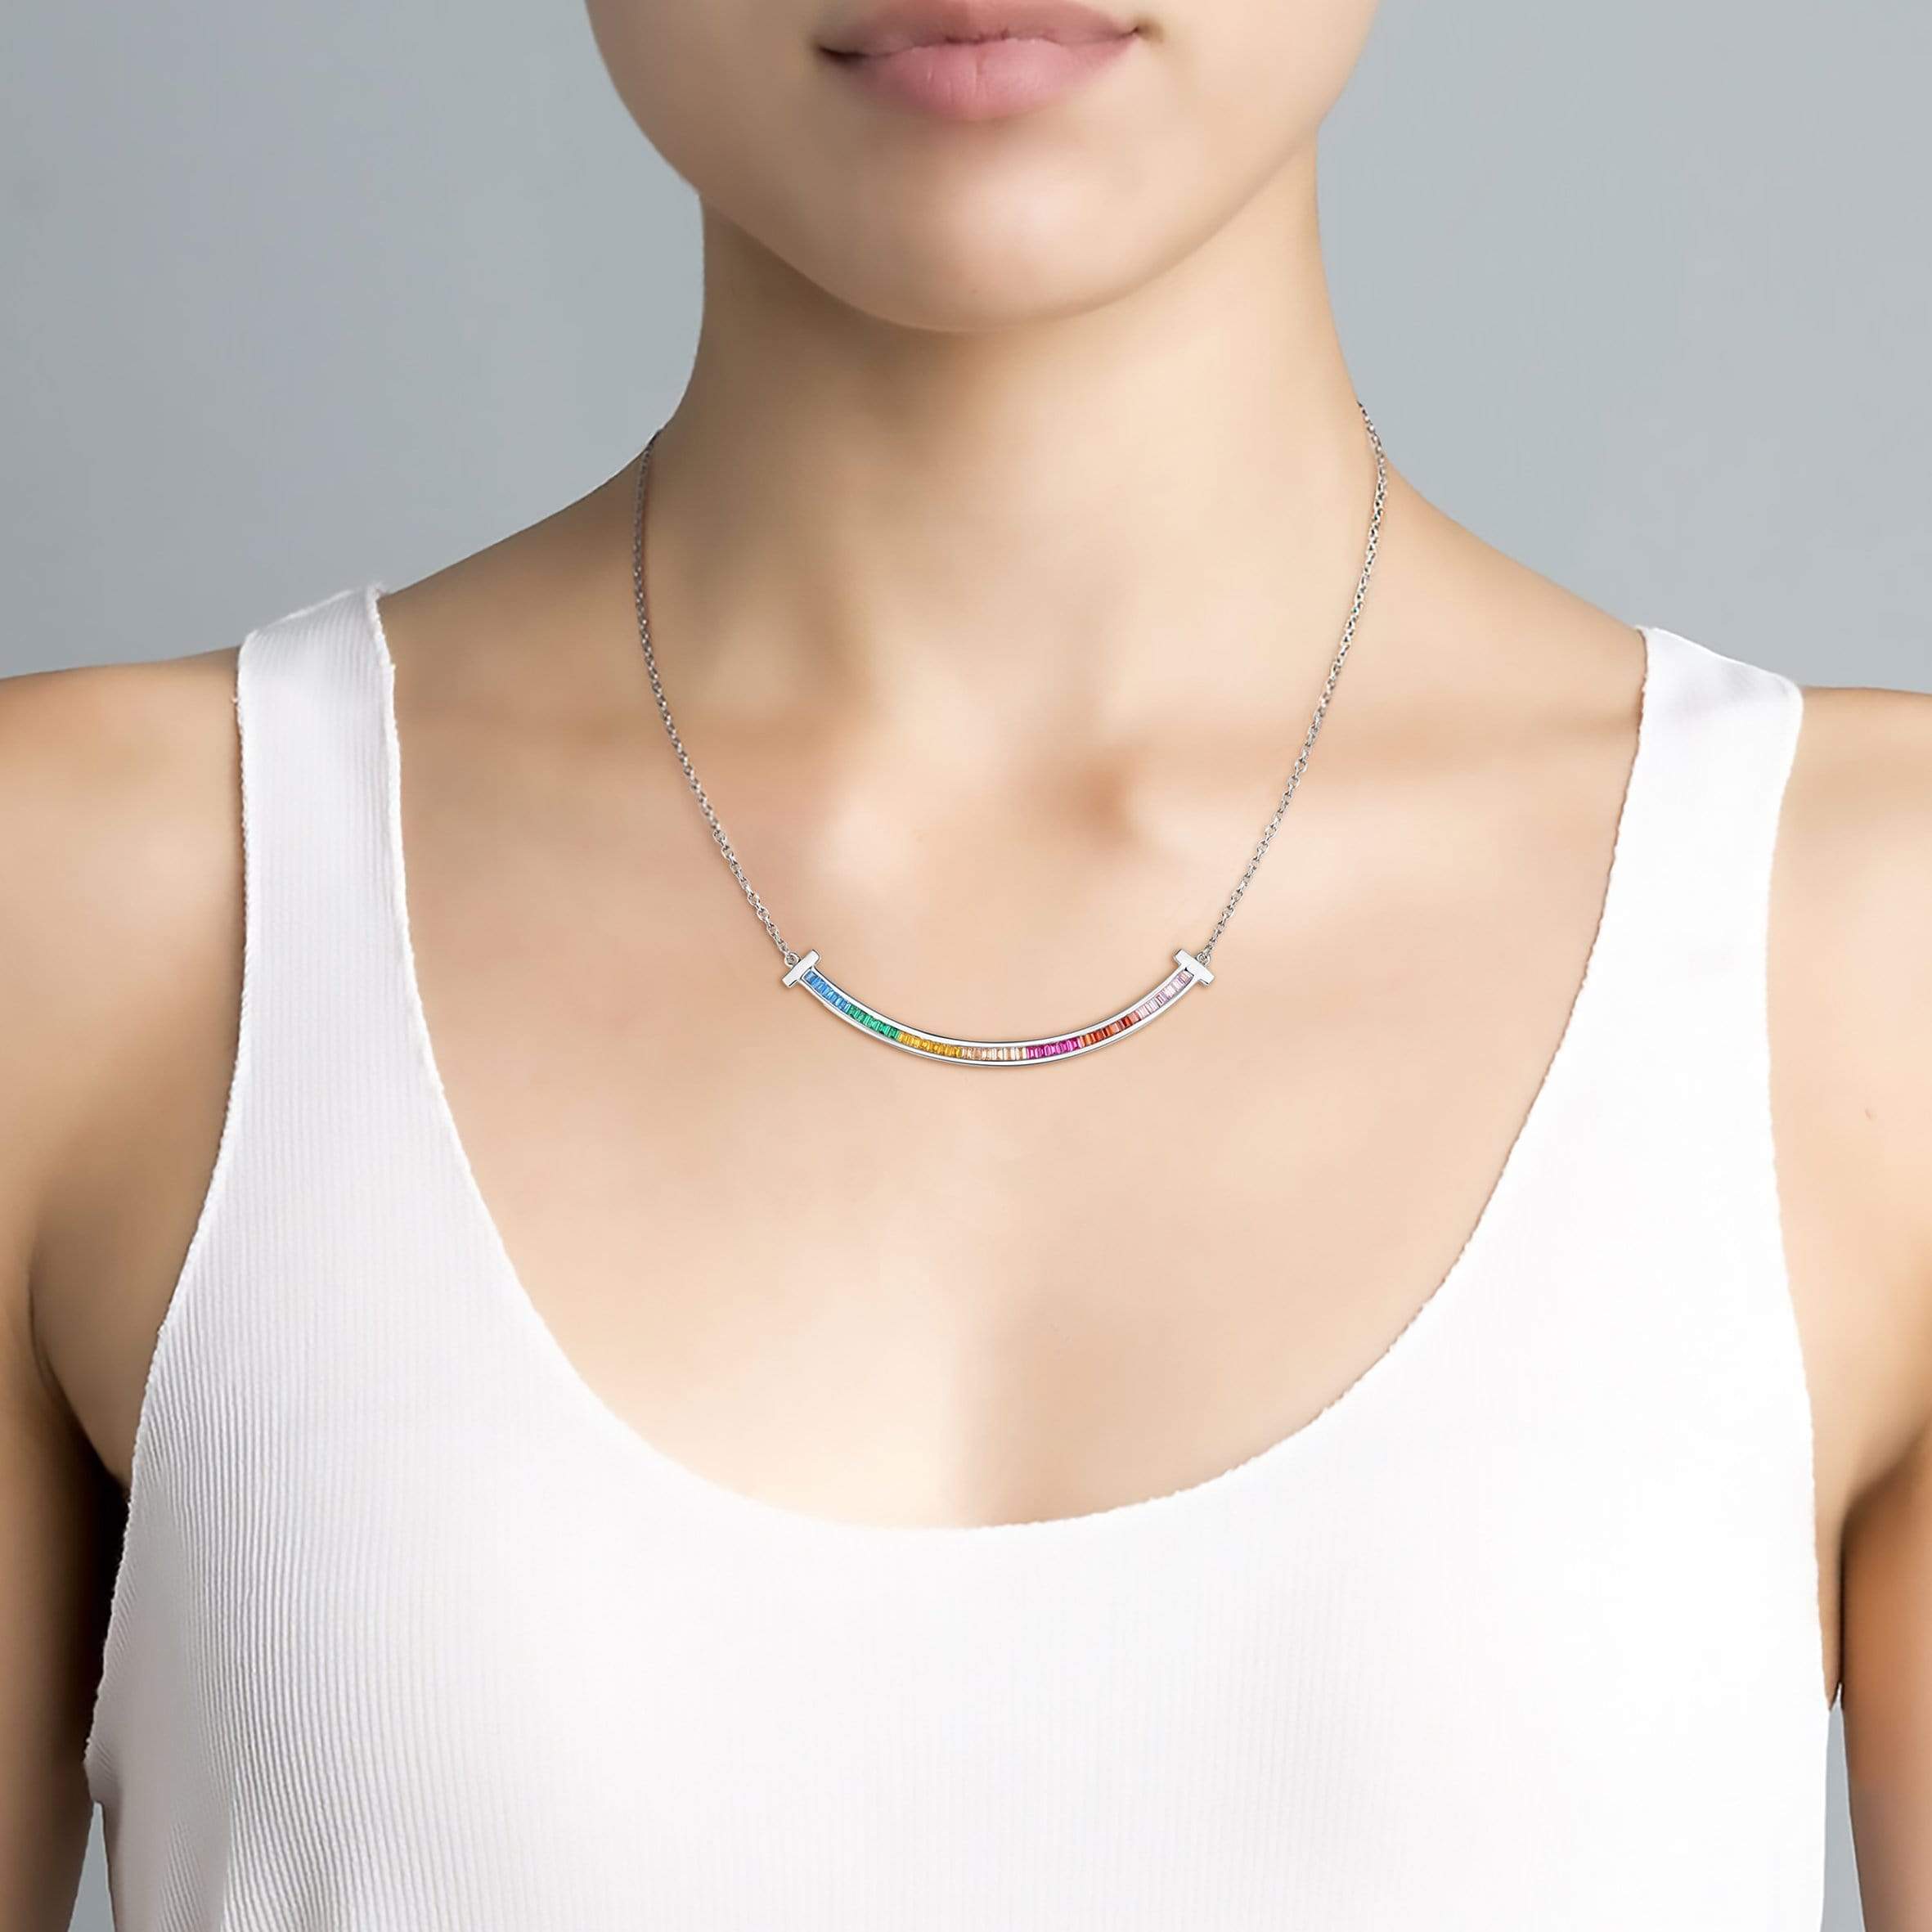 Lynora Jewellery Necklace Sterling Silver / Multi Colour Tramonto Necklace Sterling Silver